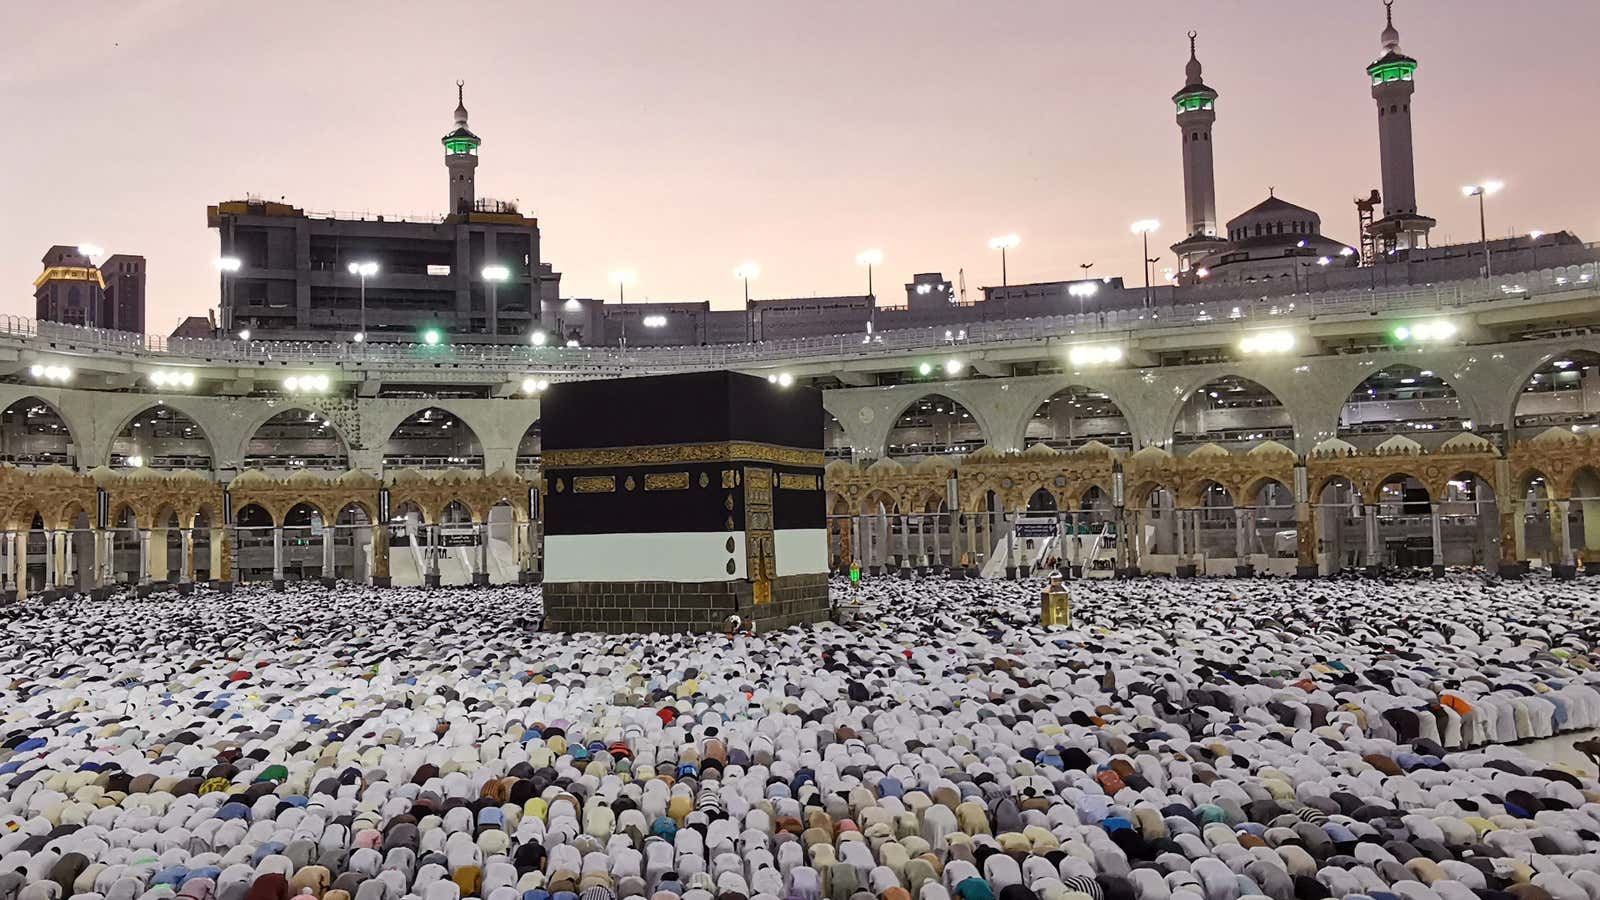 Muslims pray at the Grand Mosque during the annual Hajj pilgrimage in their holy city of Mecca, Saudi Arabia